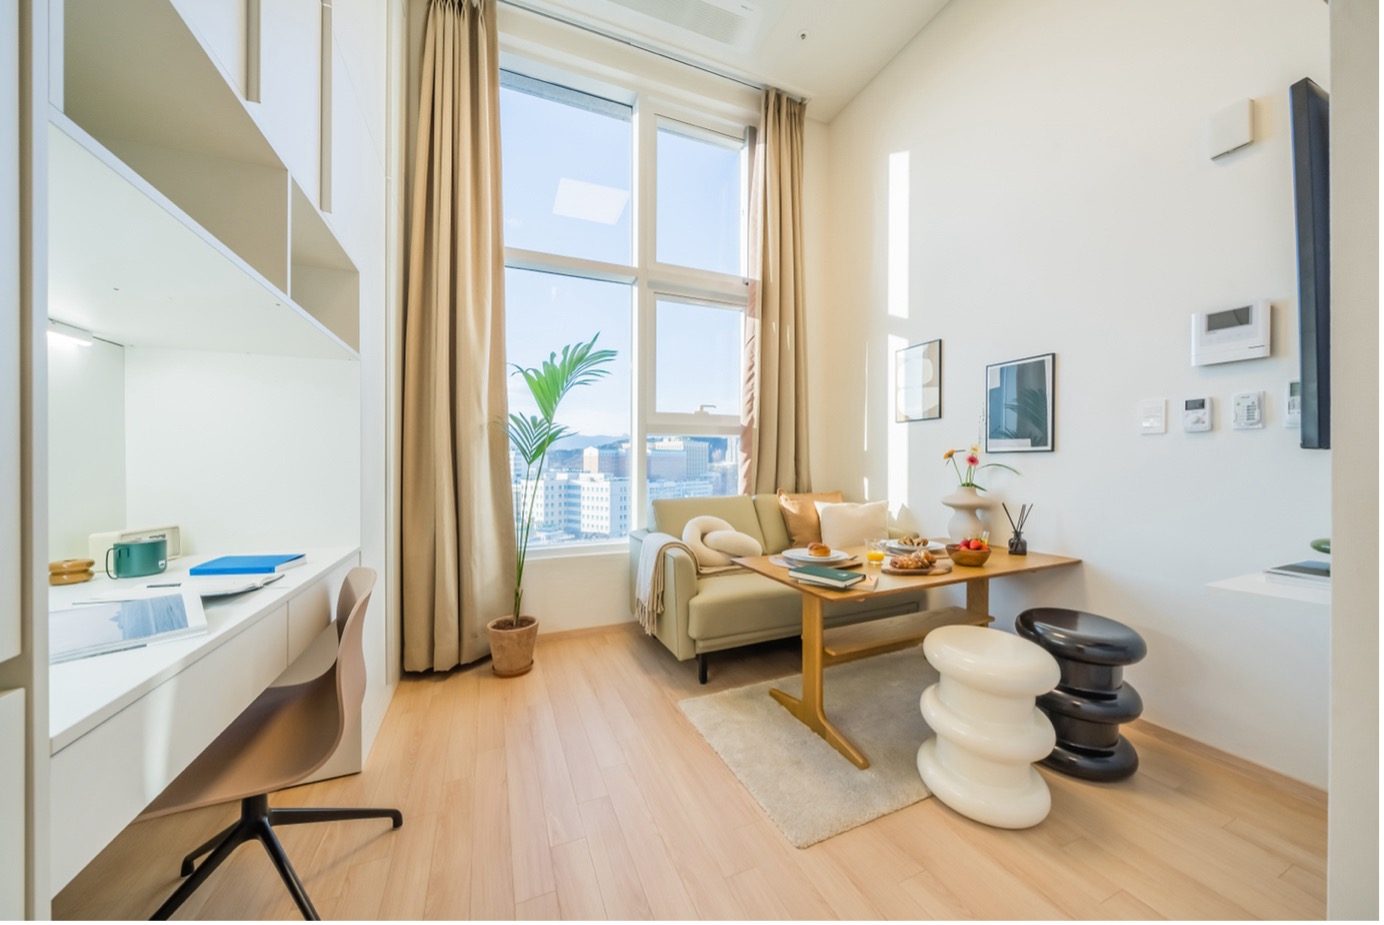 HK rental housing operator Weave Living secures more investment from Warburg Pincus